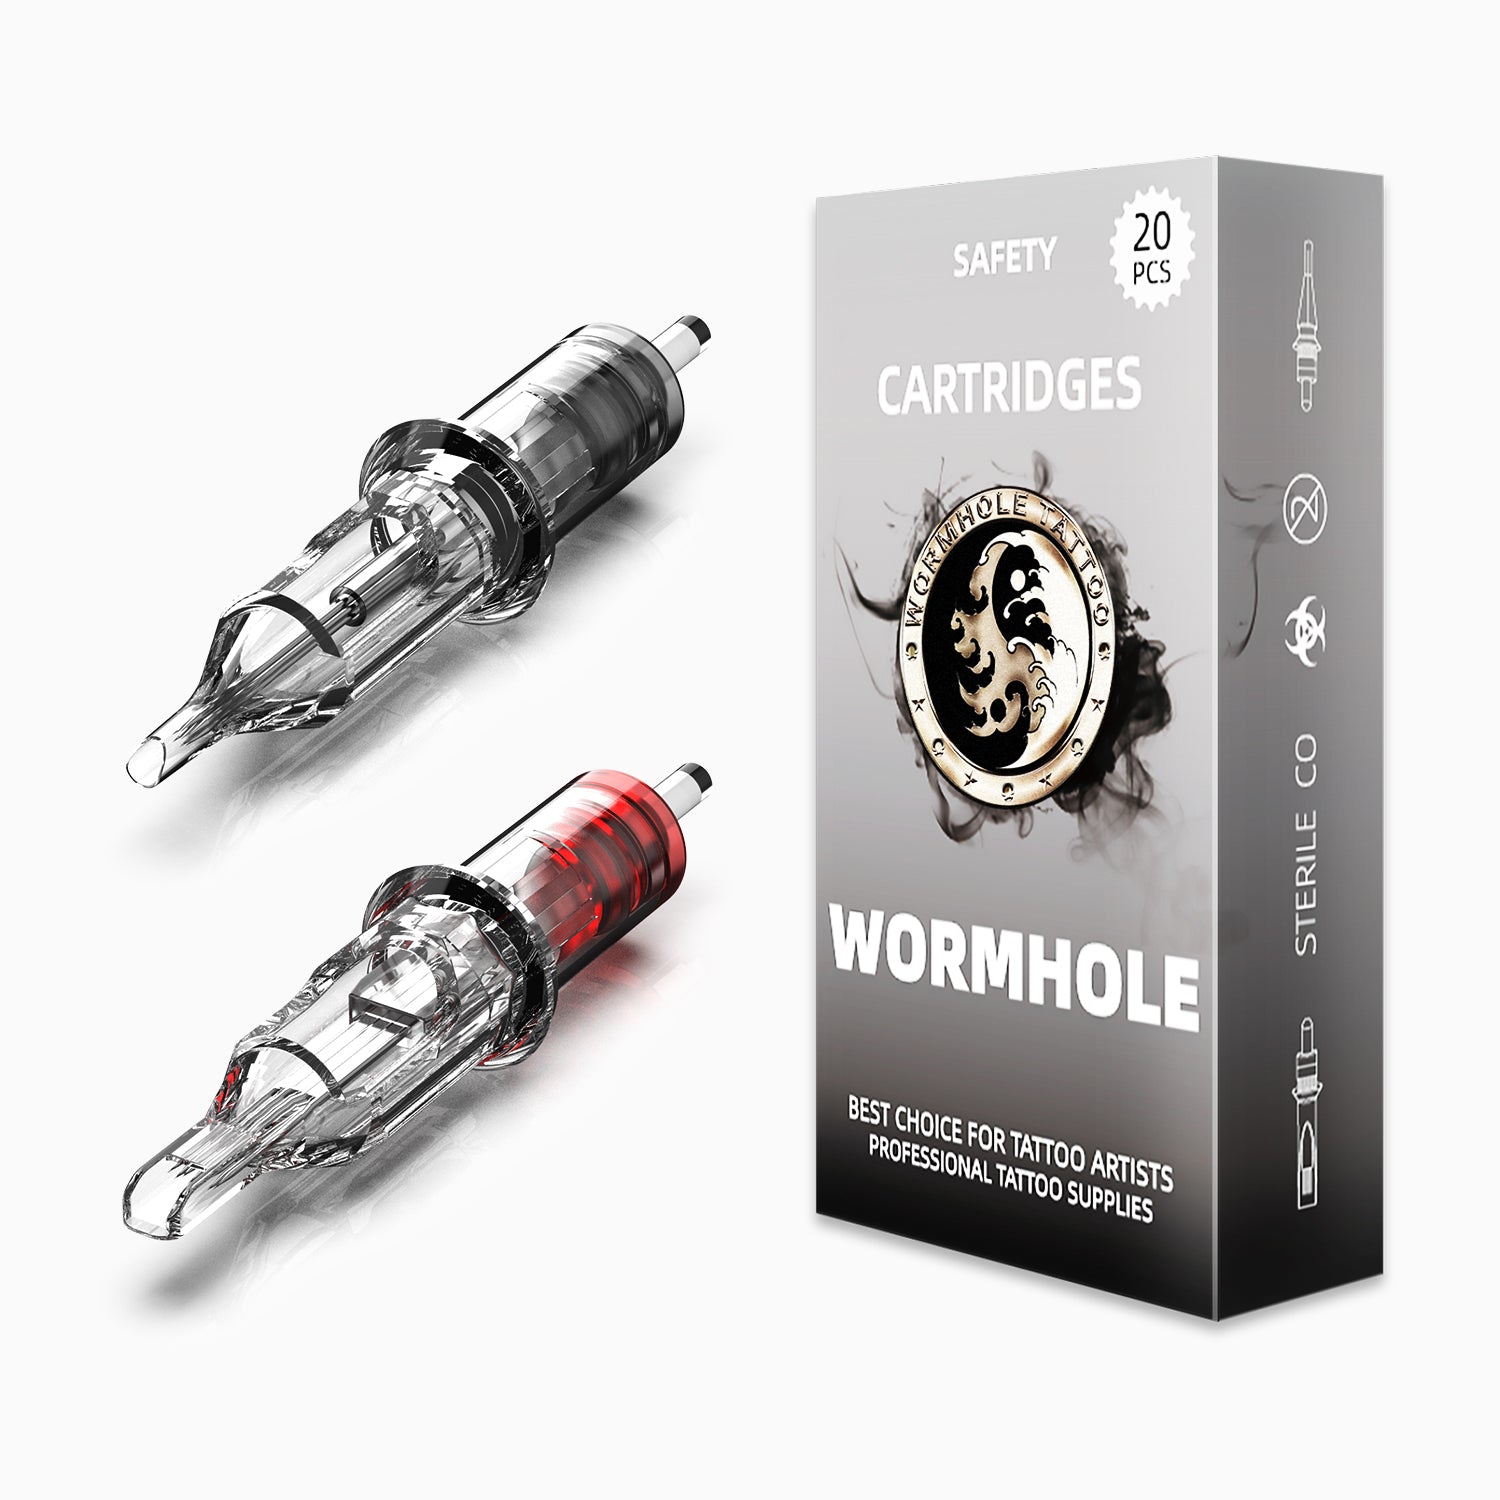  Wormhole 50pcs Tattoo Cartridge Needles Stability with  Laminated Rubber, Disposable Tattoo Needles,Individually  Packaged,Compatible All Pen Tattoo Machine Mixed 3RL 5RL 7RL 9RL 11RL #12  Standard RL : Beauty & Personal Care